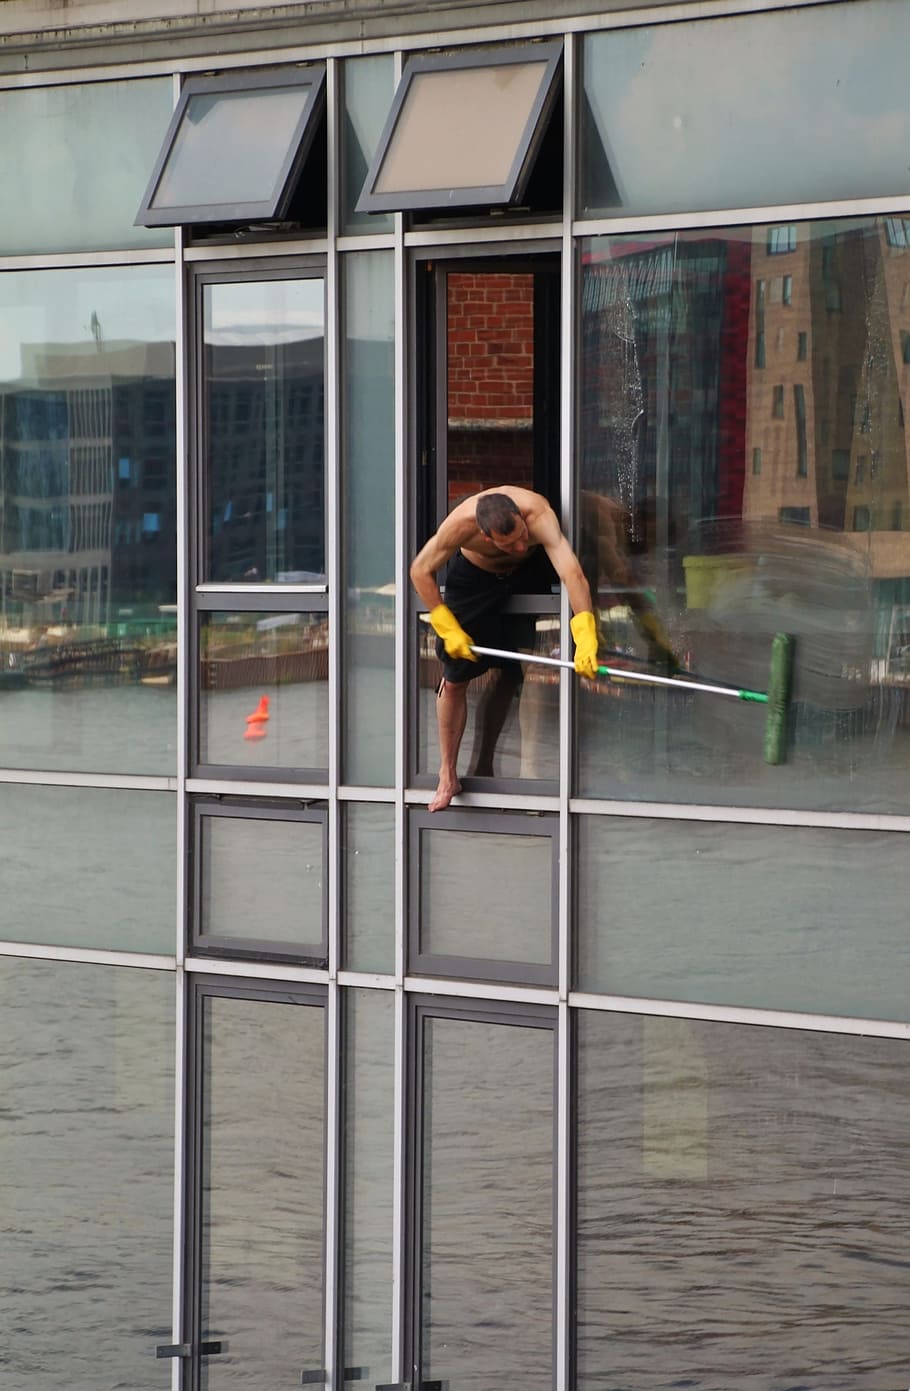 man cleaning window, window cleaner, architecture, home, building, wall, window, facade, modern, germany